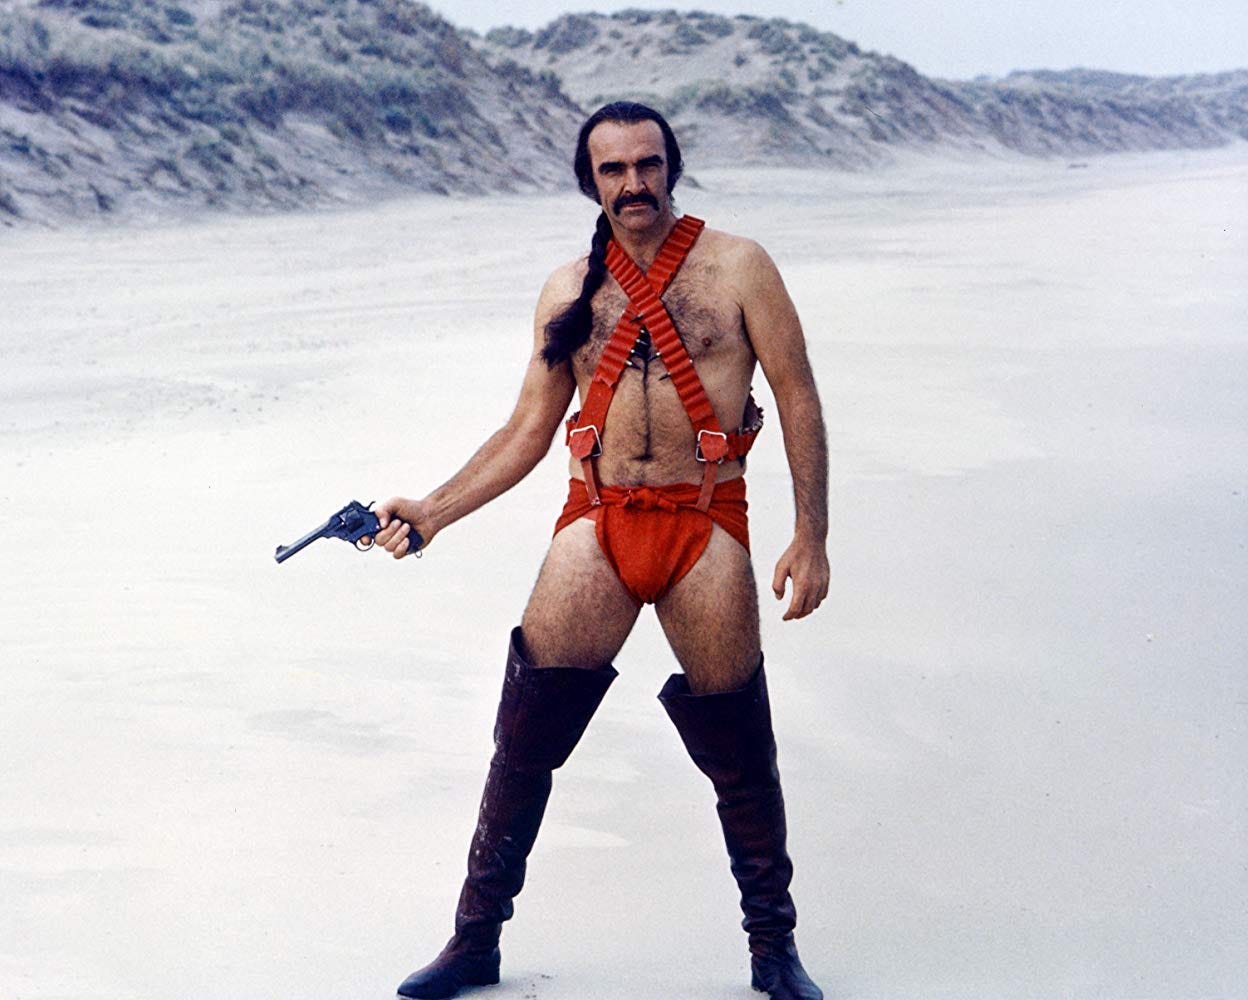 Zardoz Explained. Let us meditate upon these truths atâ€¦ | by Scott  Clevenger | Medium